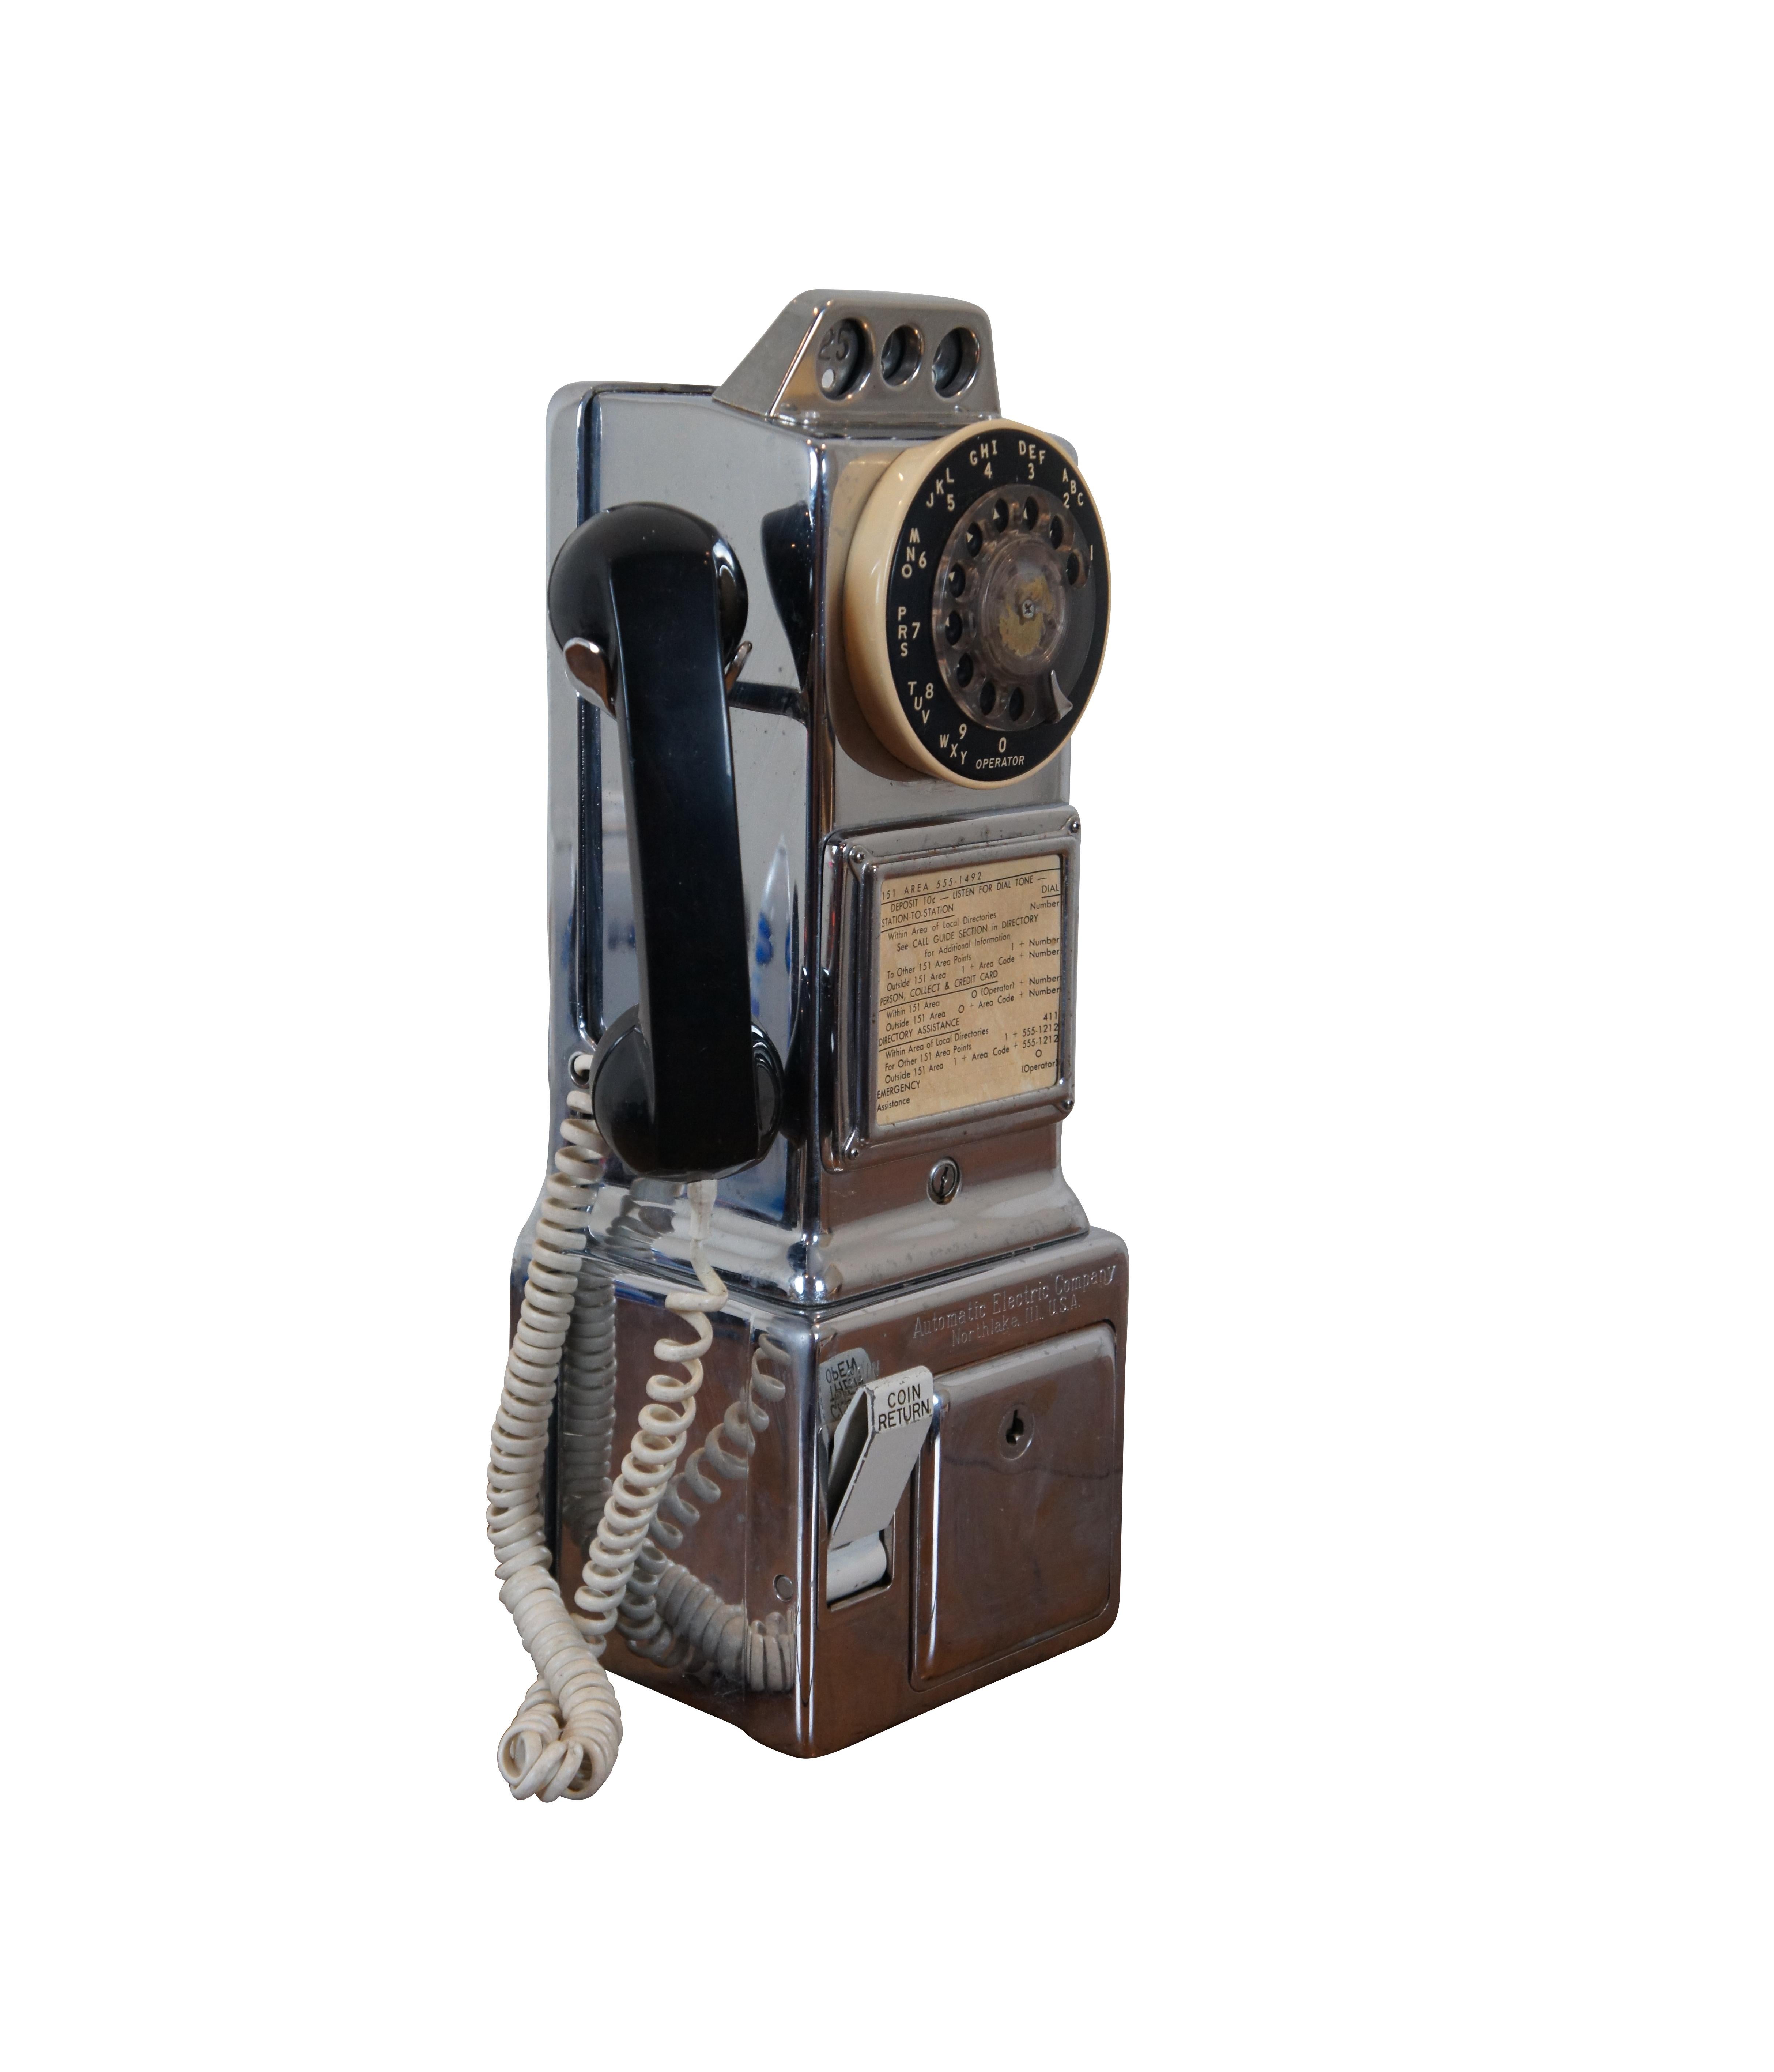 Vintage 1950s wall mounted pay phone / telephone by the Automatic Electric Company, with three coin slots, rotary dial, and black plastic receiver. Measure: 18